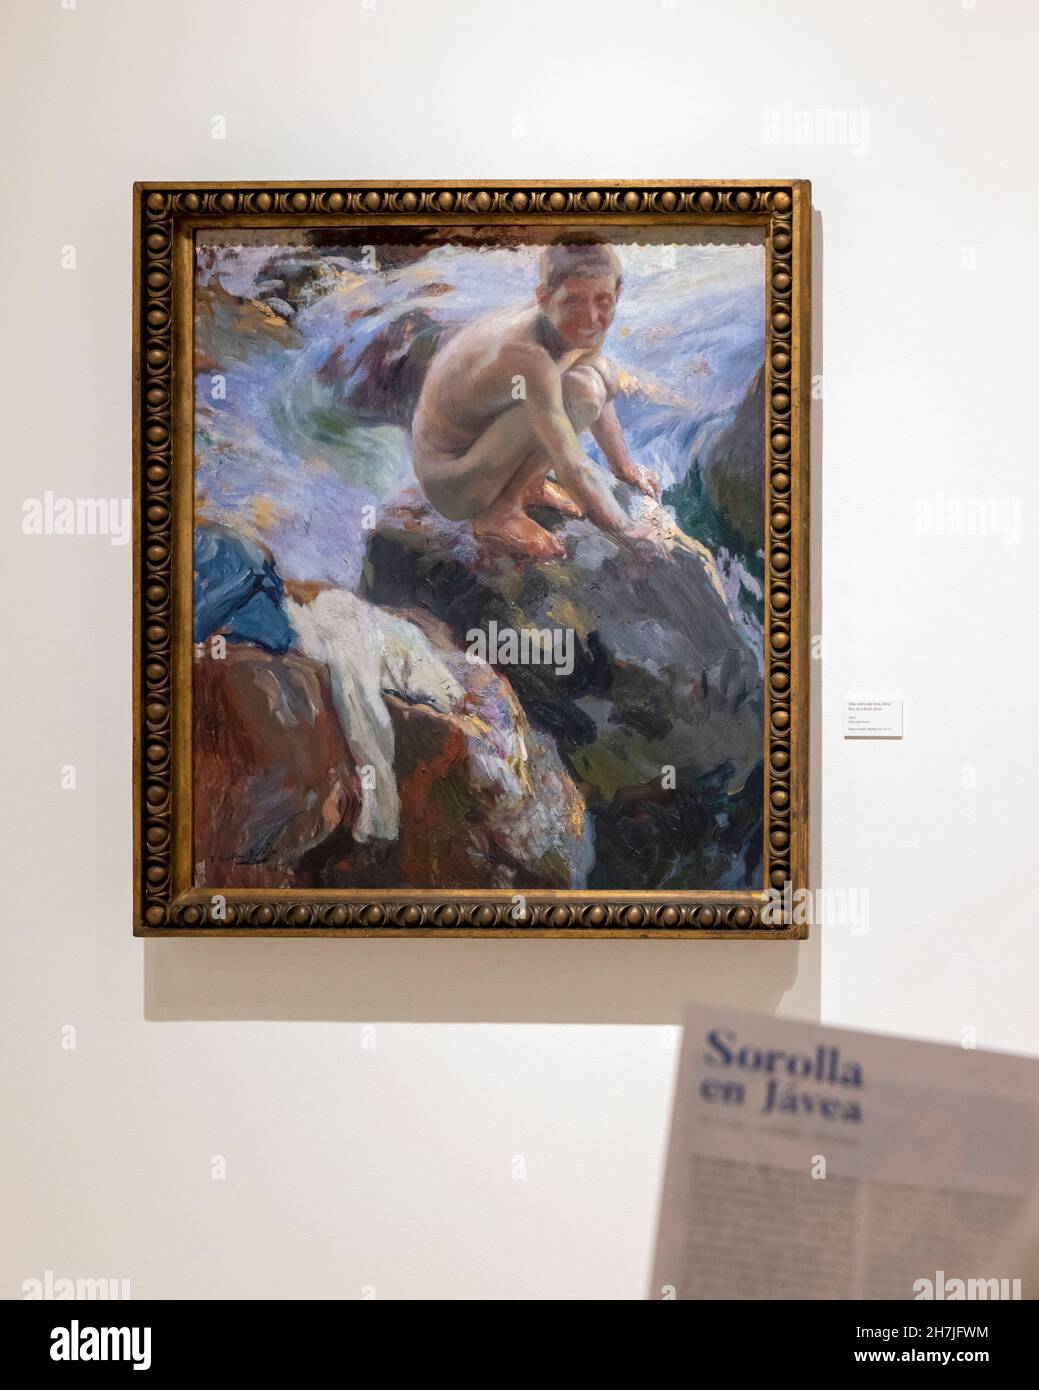 hi-res stock and Alamy sorolla images painter photography Museum joaquin -